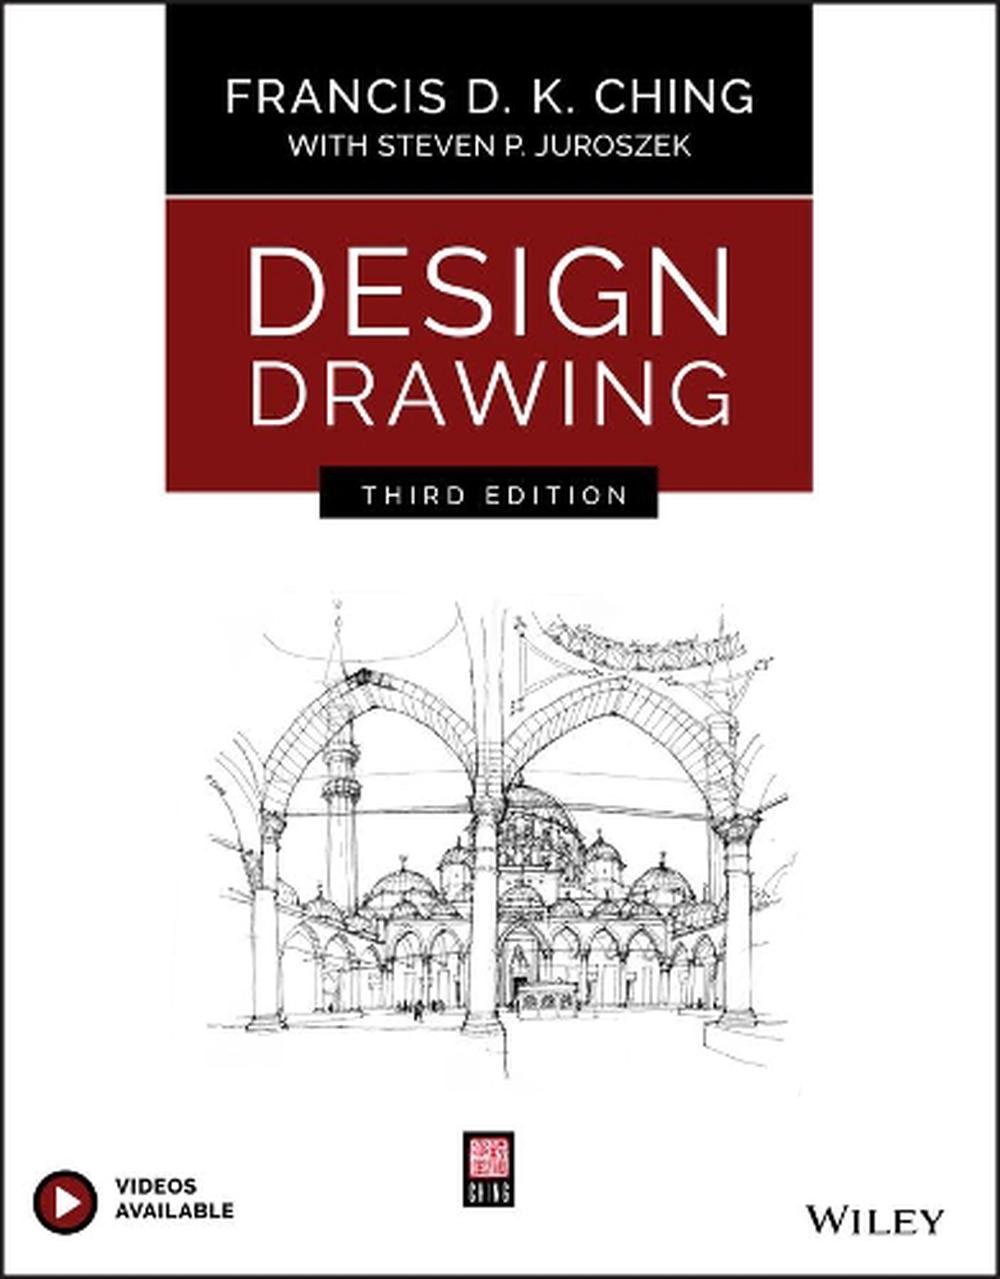 Design Drawing, 3rd Edition by Francis D.K. Ching, Paperback